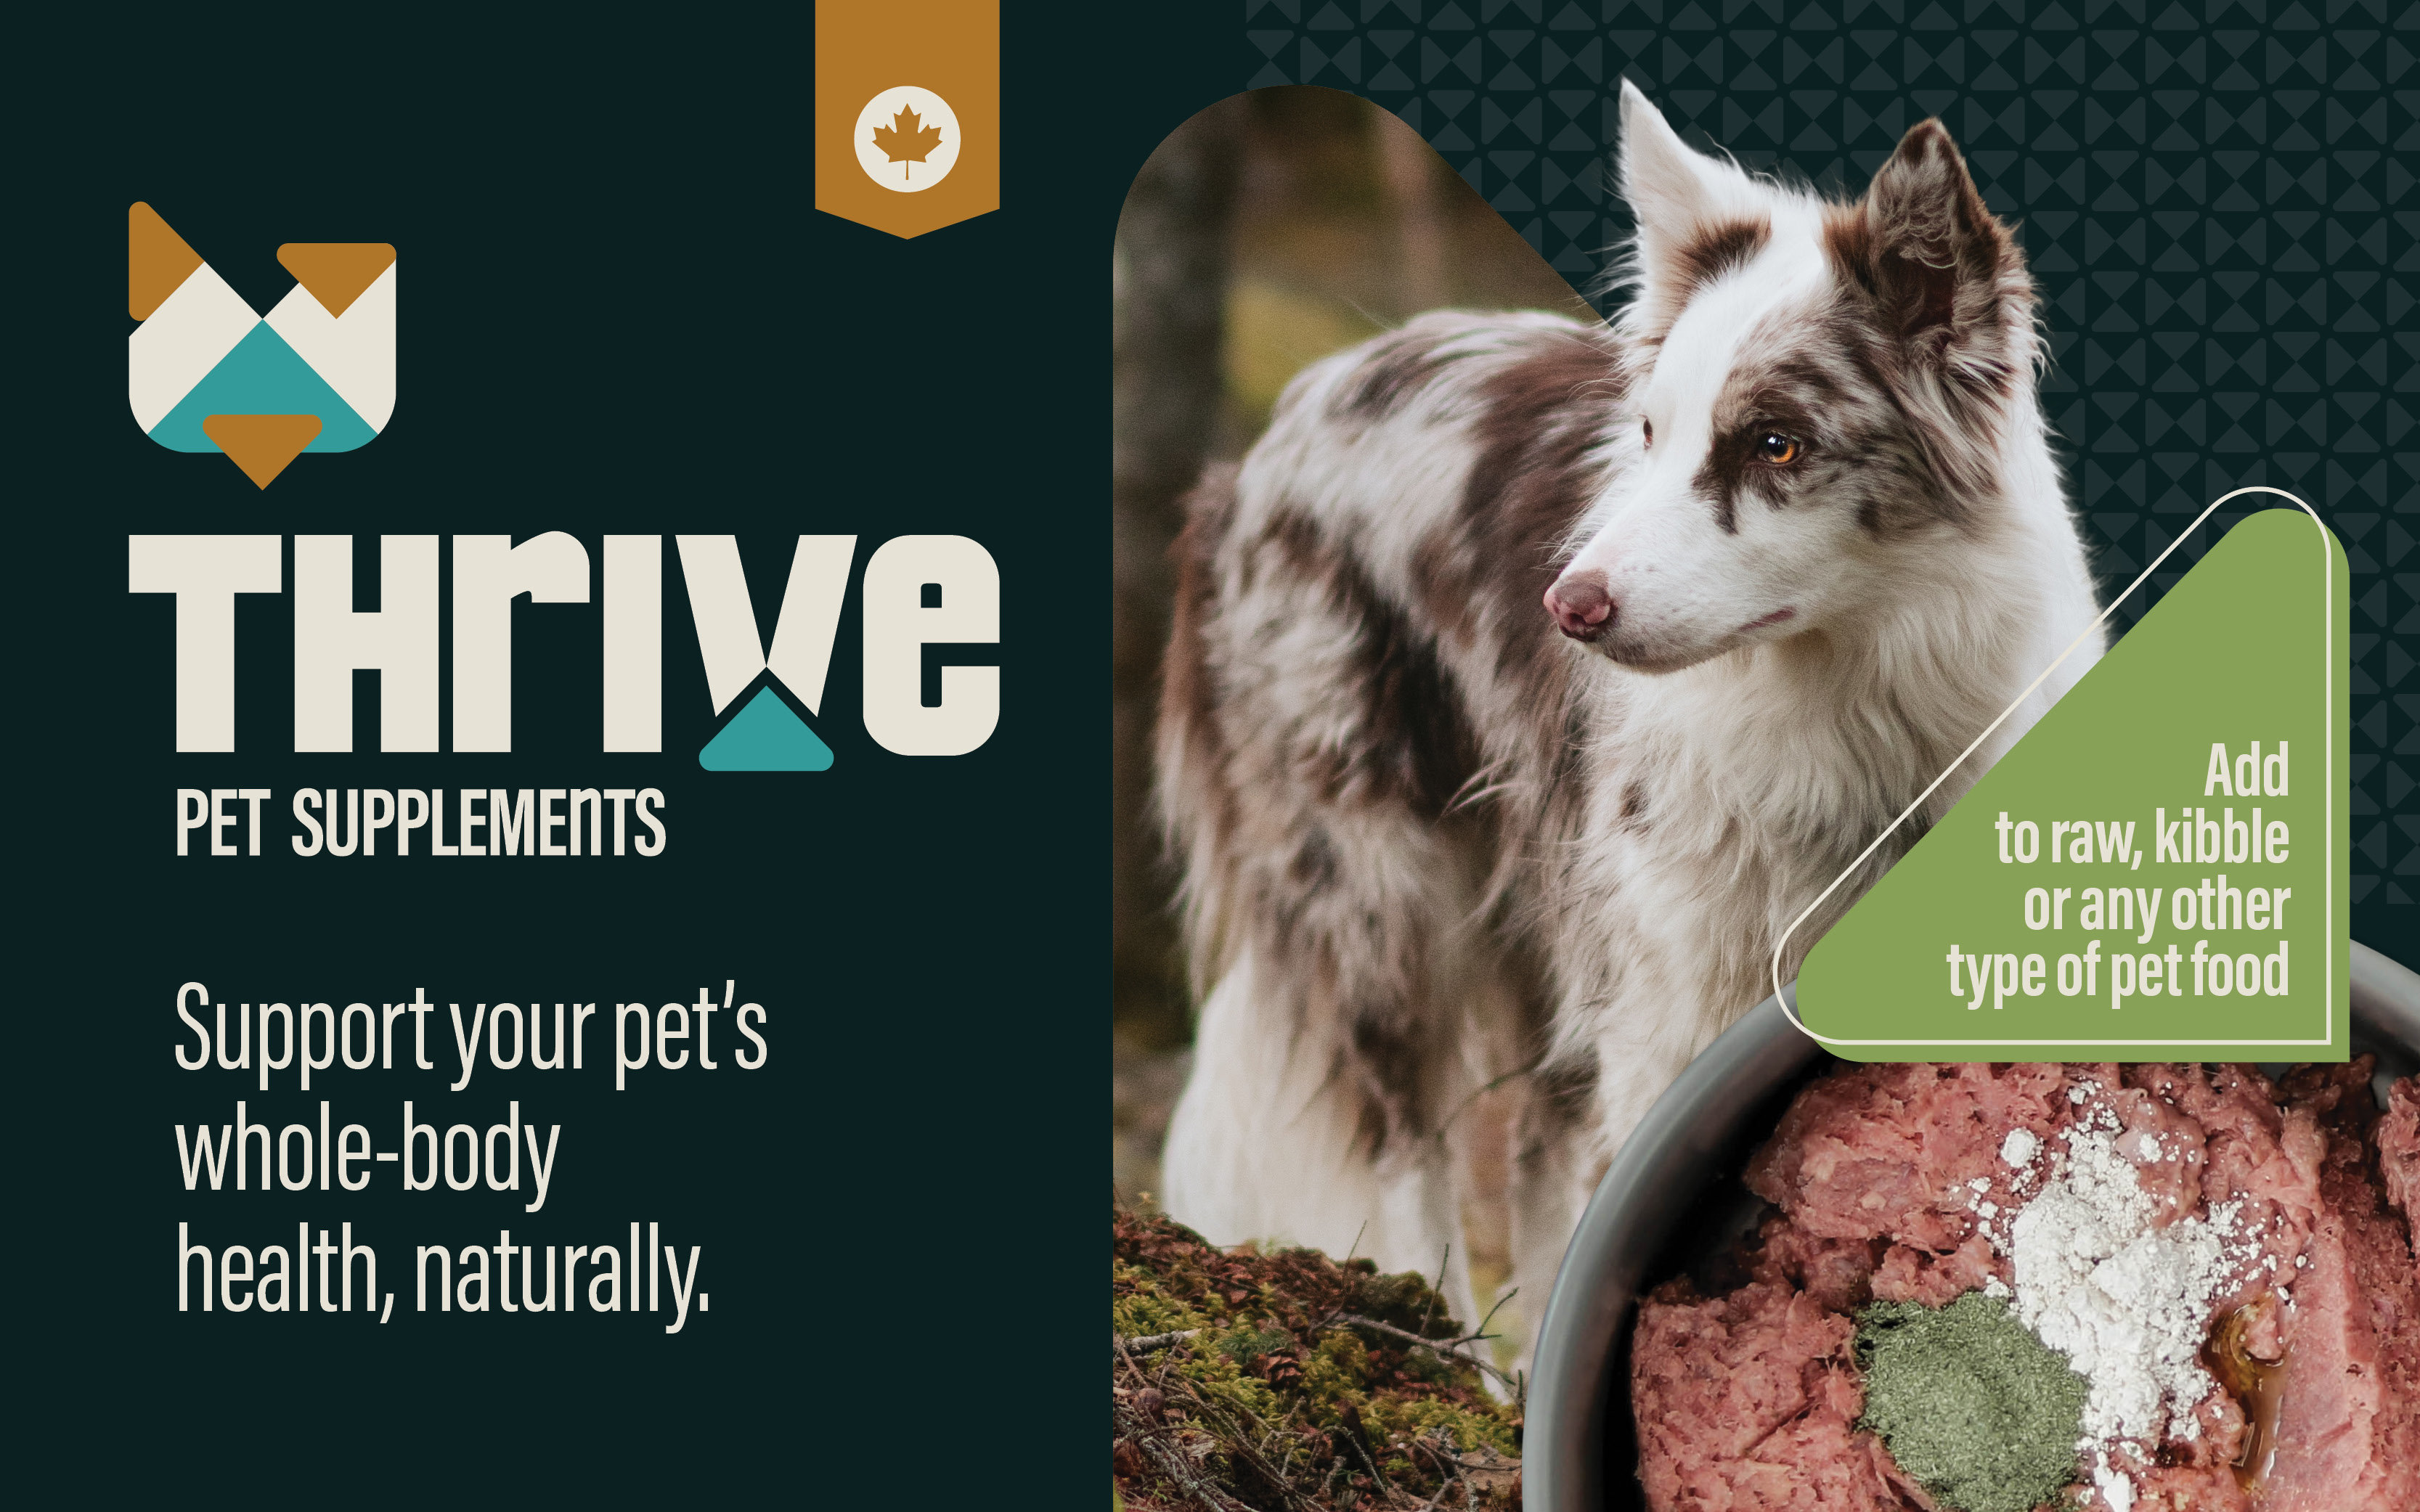 Thrive Pet Supplements. Support your pet's whole body health, naturally.